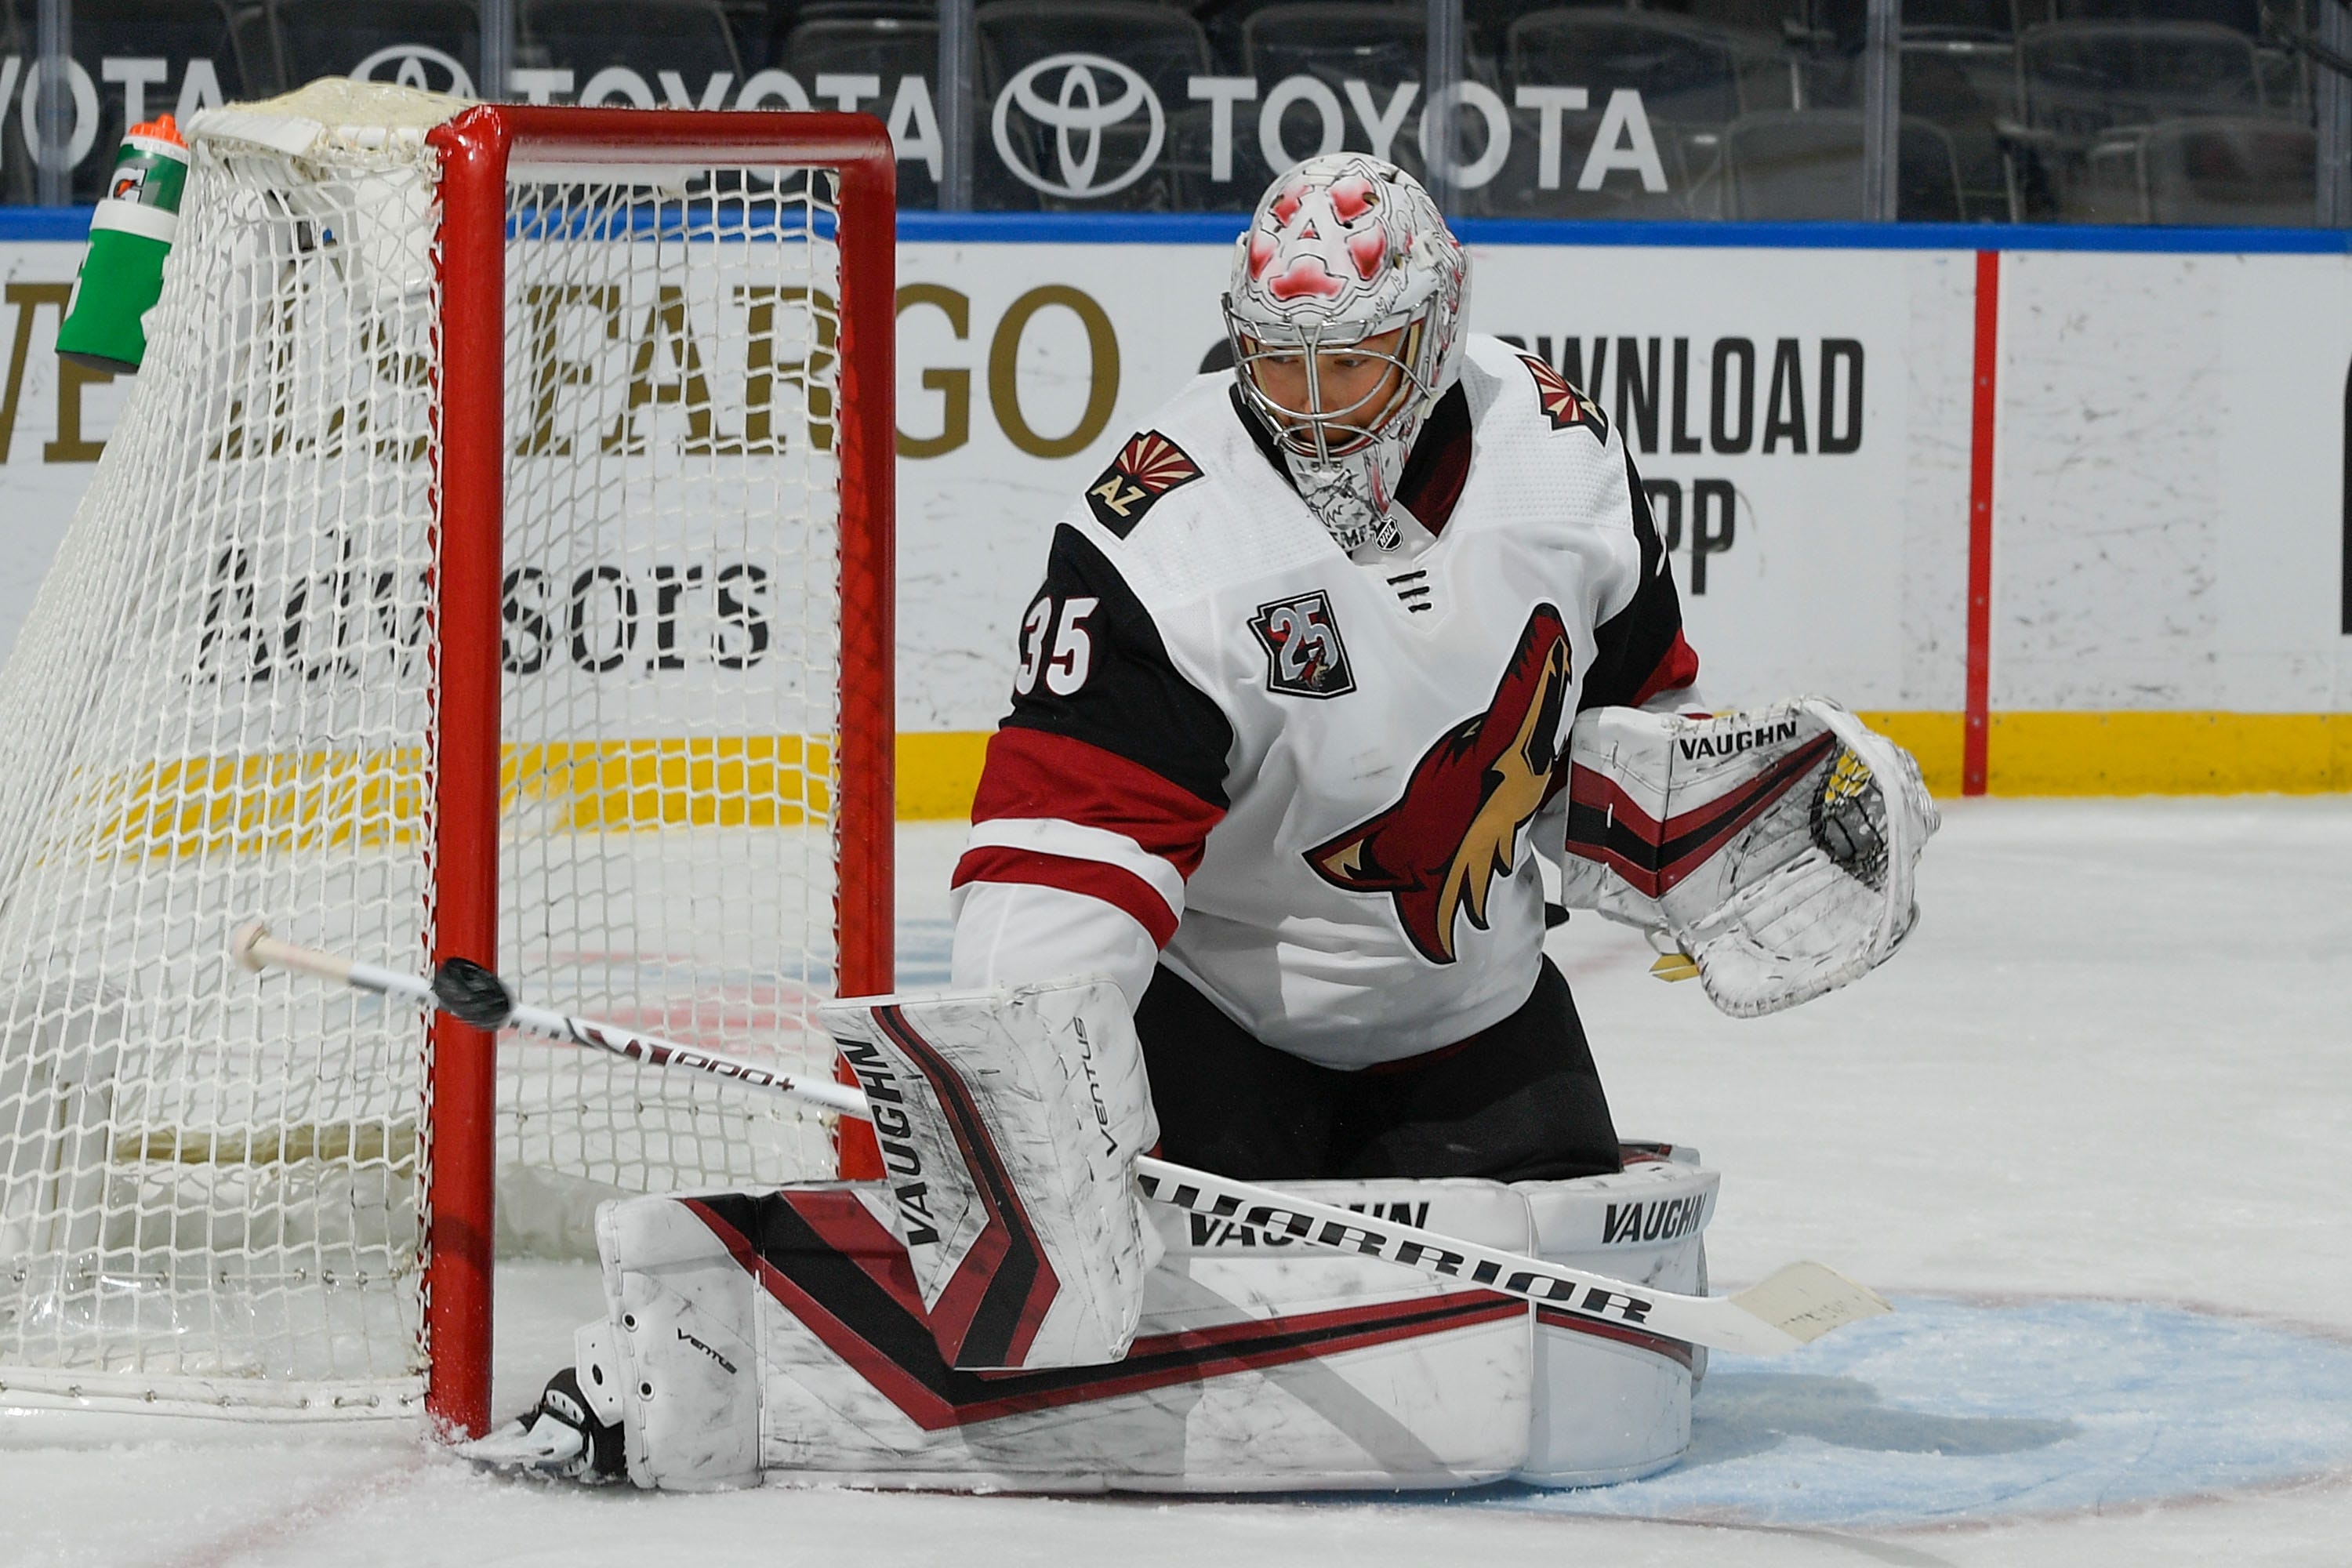 Arizona Coyotes: Playoff chances take hit as Darcy Kuemper is injured